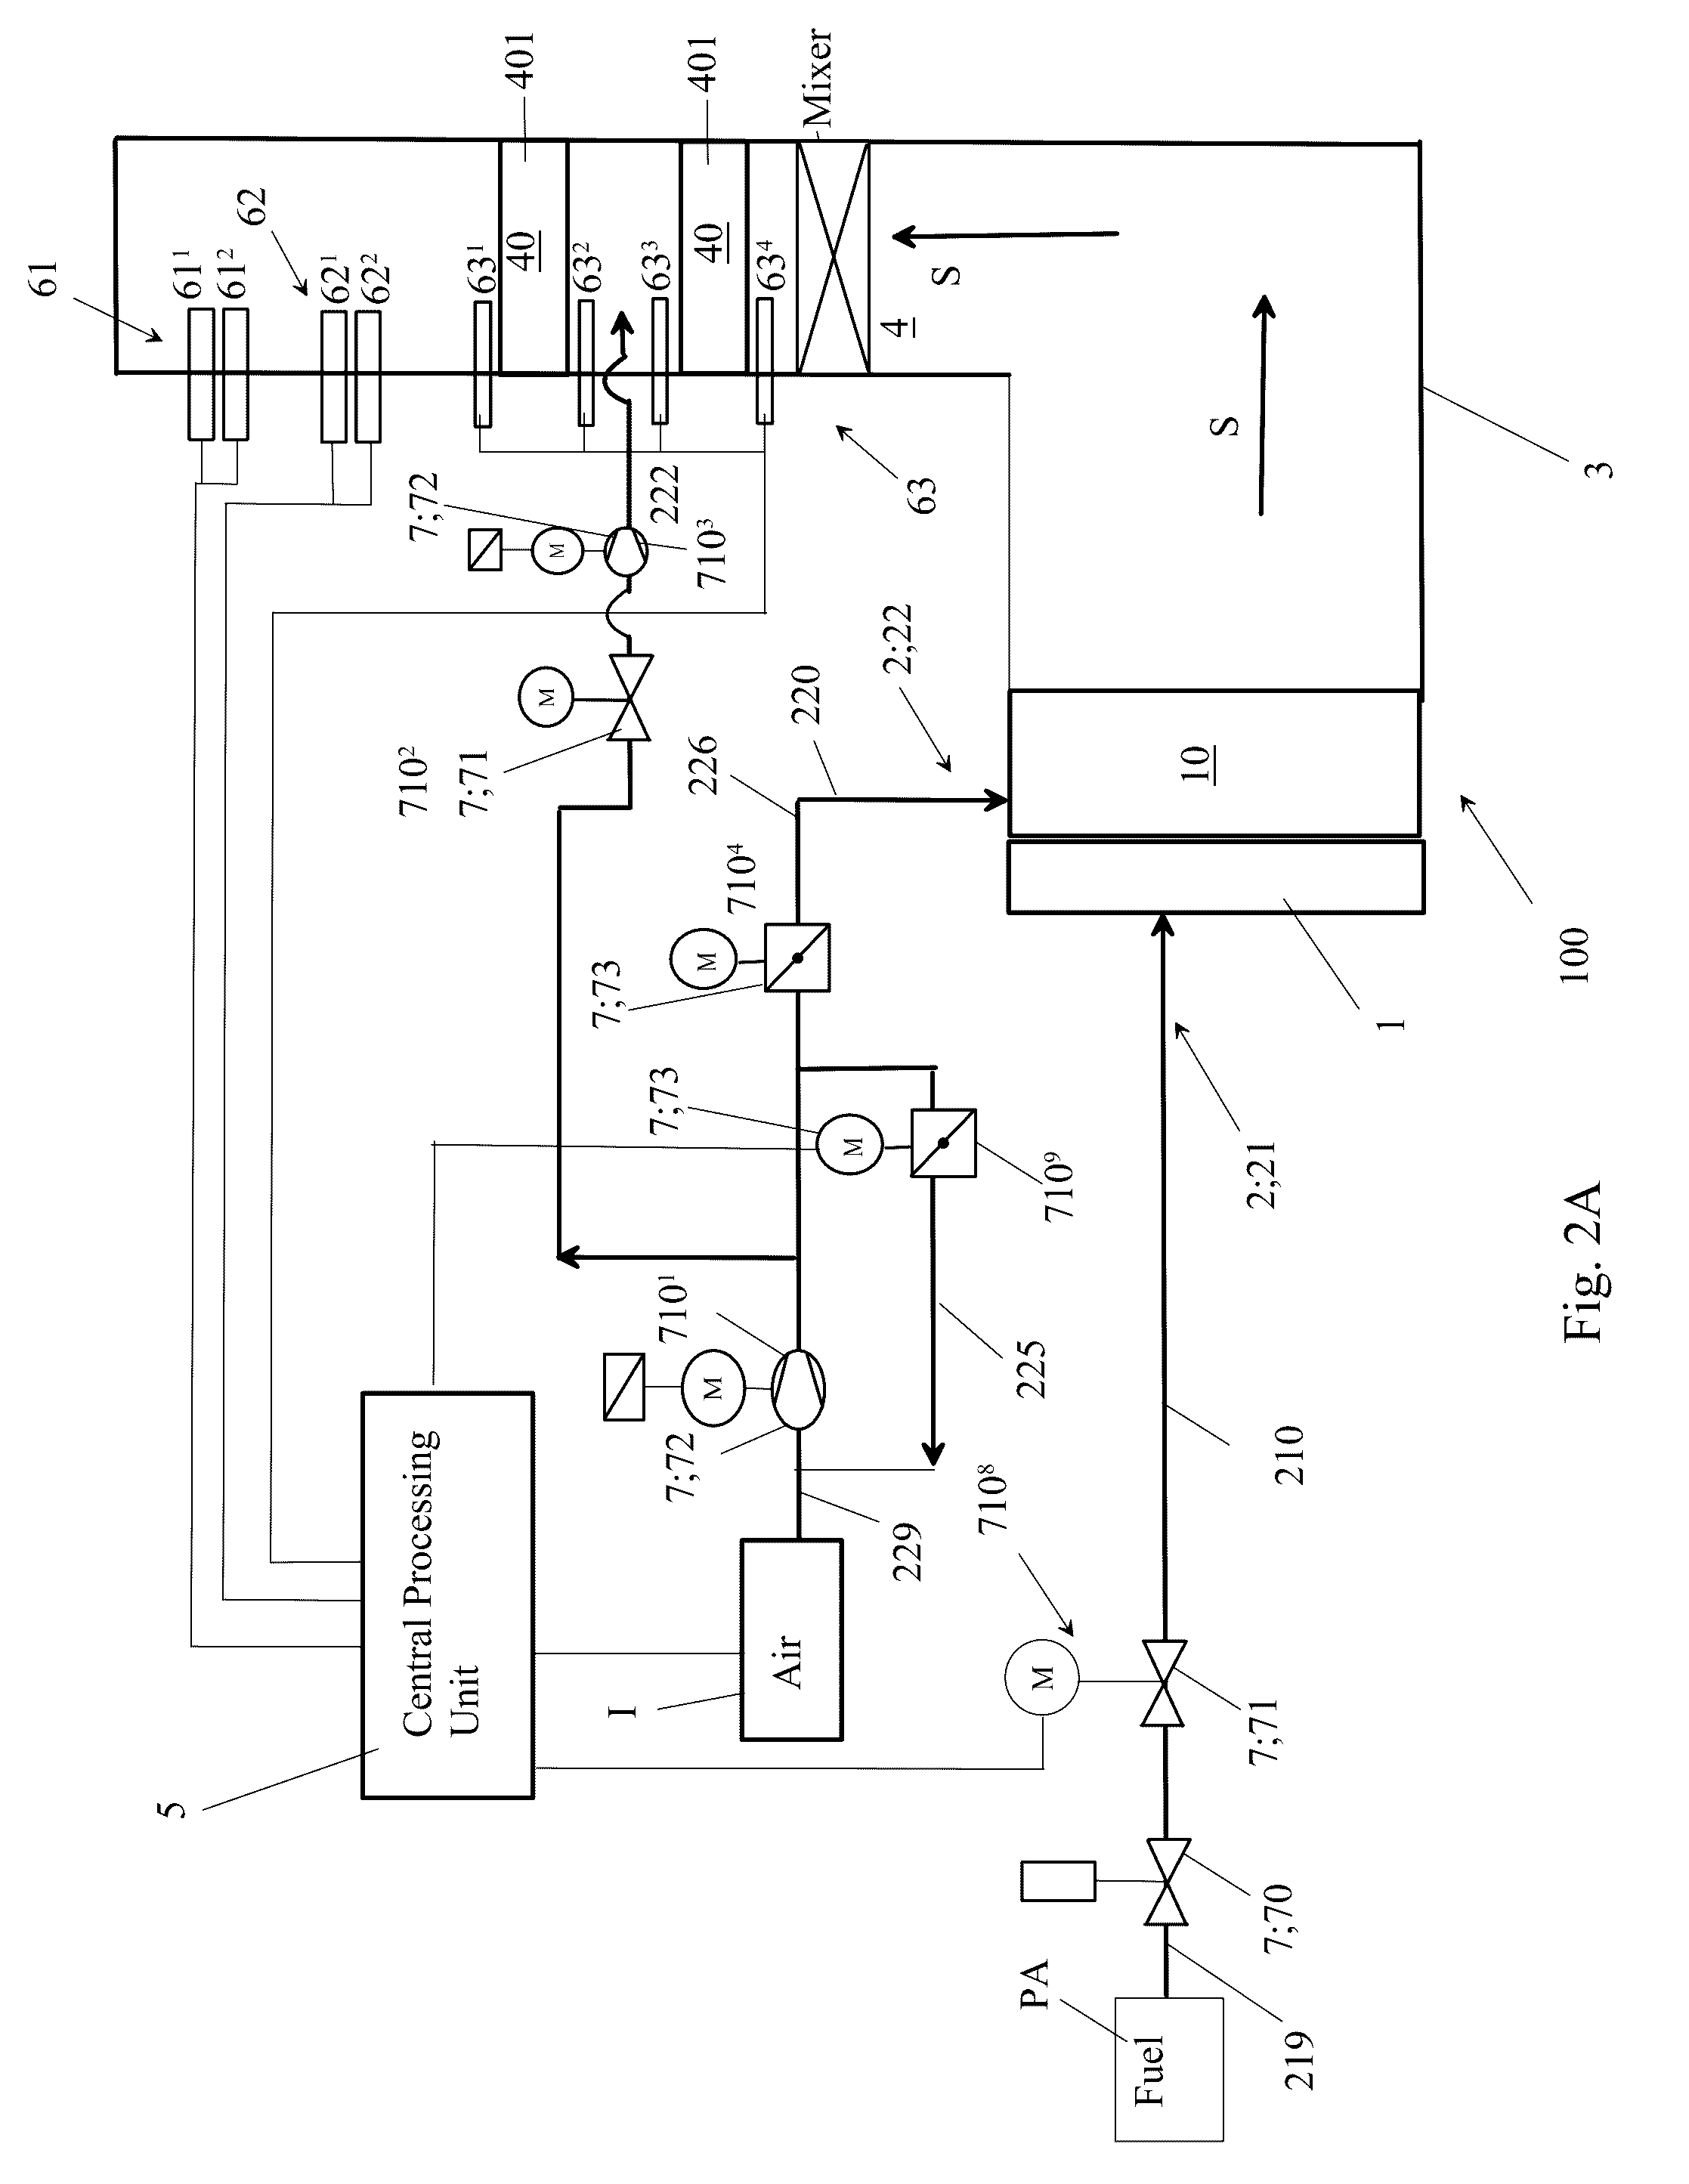 Arrangement and burner automation for adjusting the ratio between supplied amounts of fuel and air in an industrial burner